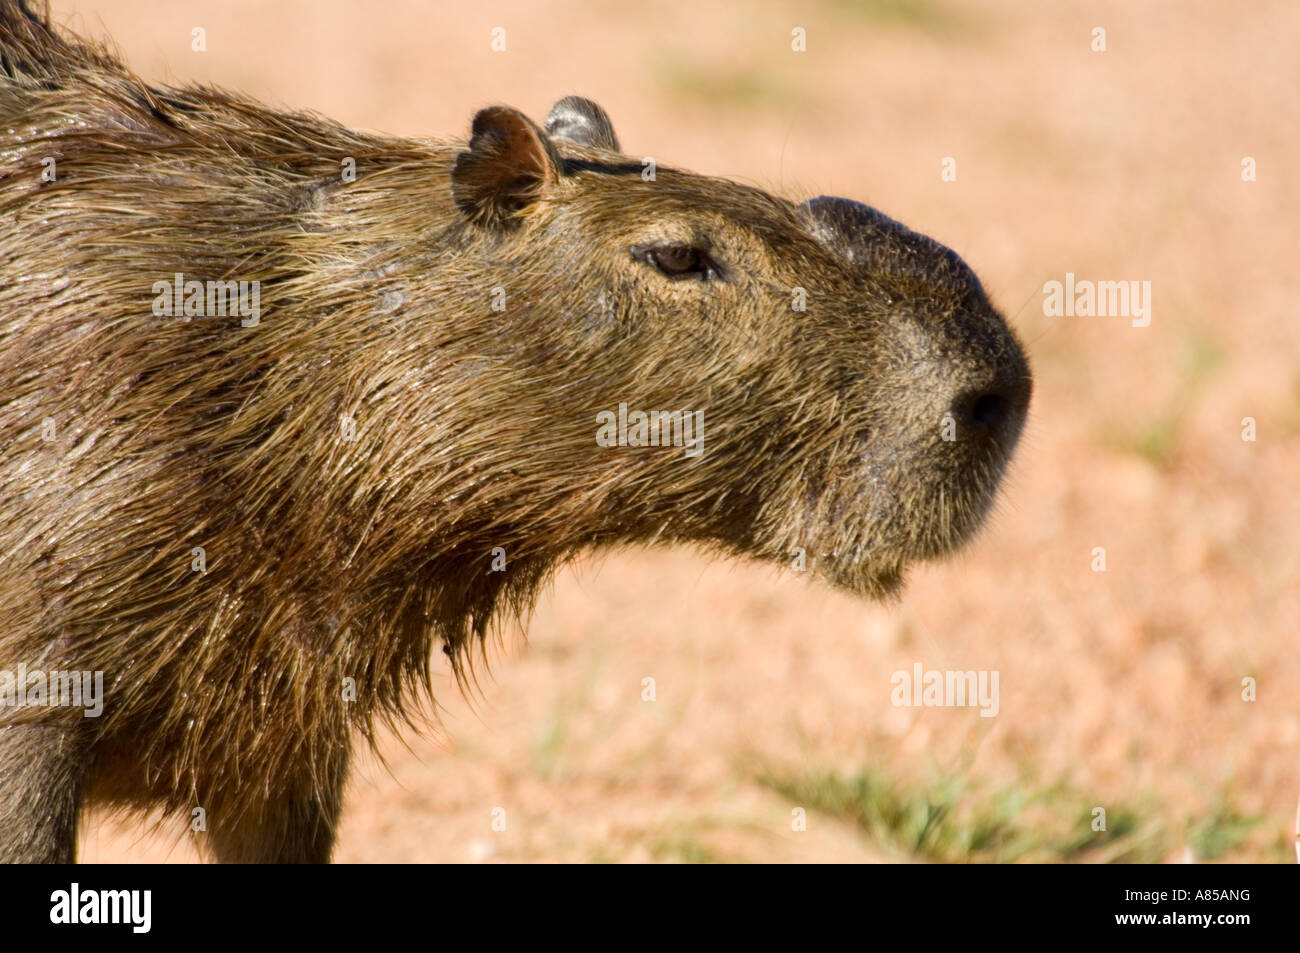 The Capybara (Hydrochaeris hydrochaeris) is the world's largest rodent.  They can often be seen on the roads in the Pantanal. Stock Photo